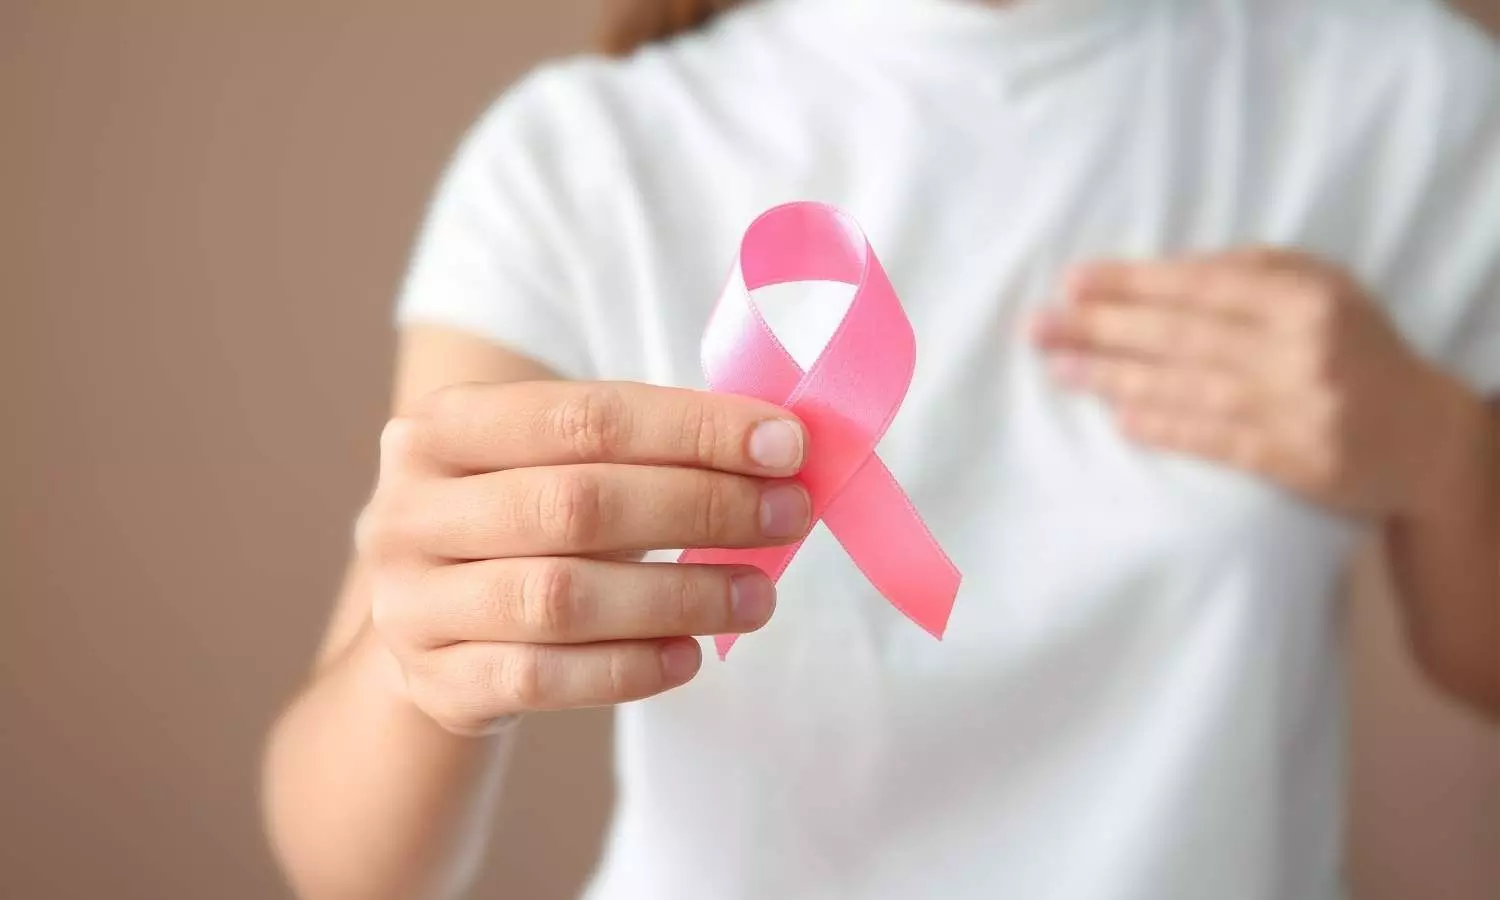 Early-stage breast cancer patients who respond favorably to chemotherapy may not need surgery: Lancet